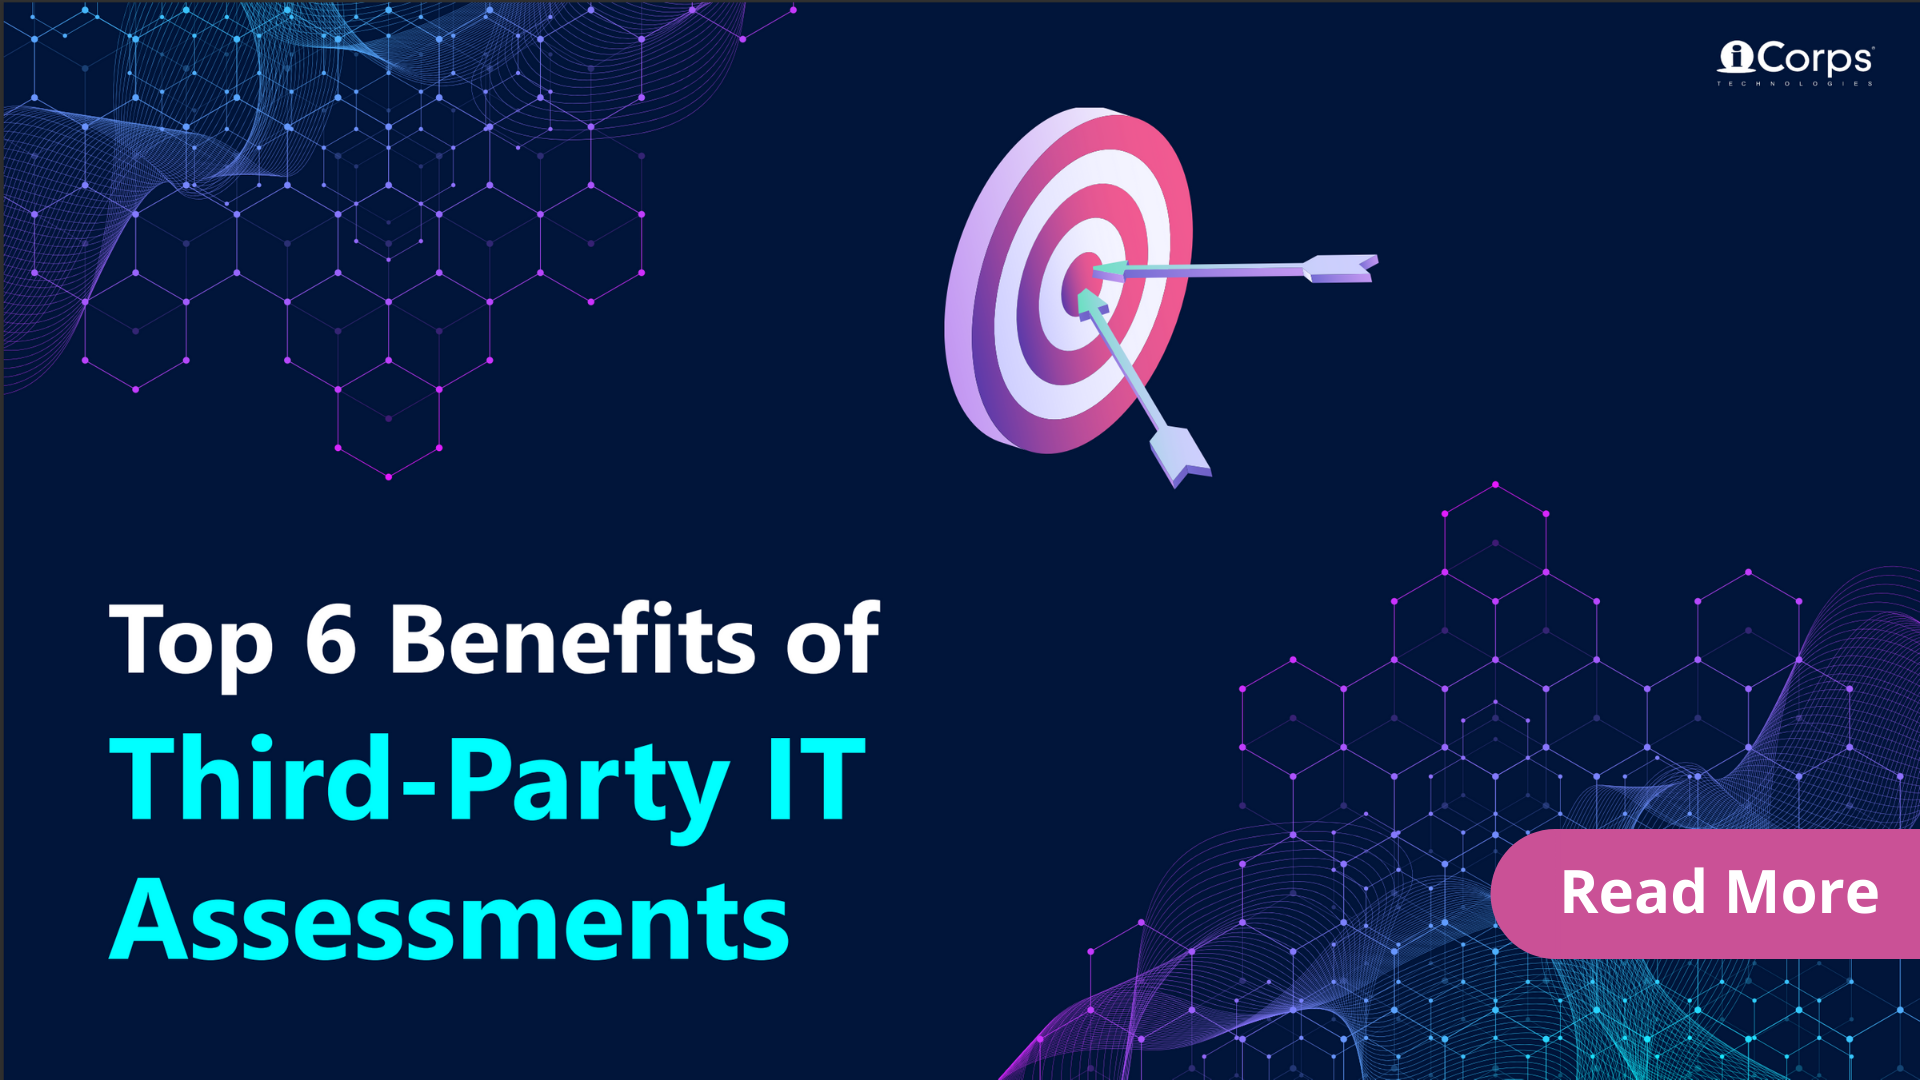 download-the-ebook-top-6-benefits-of-third-party-assessments